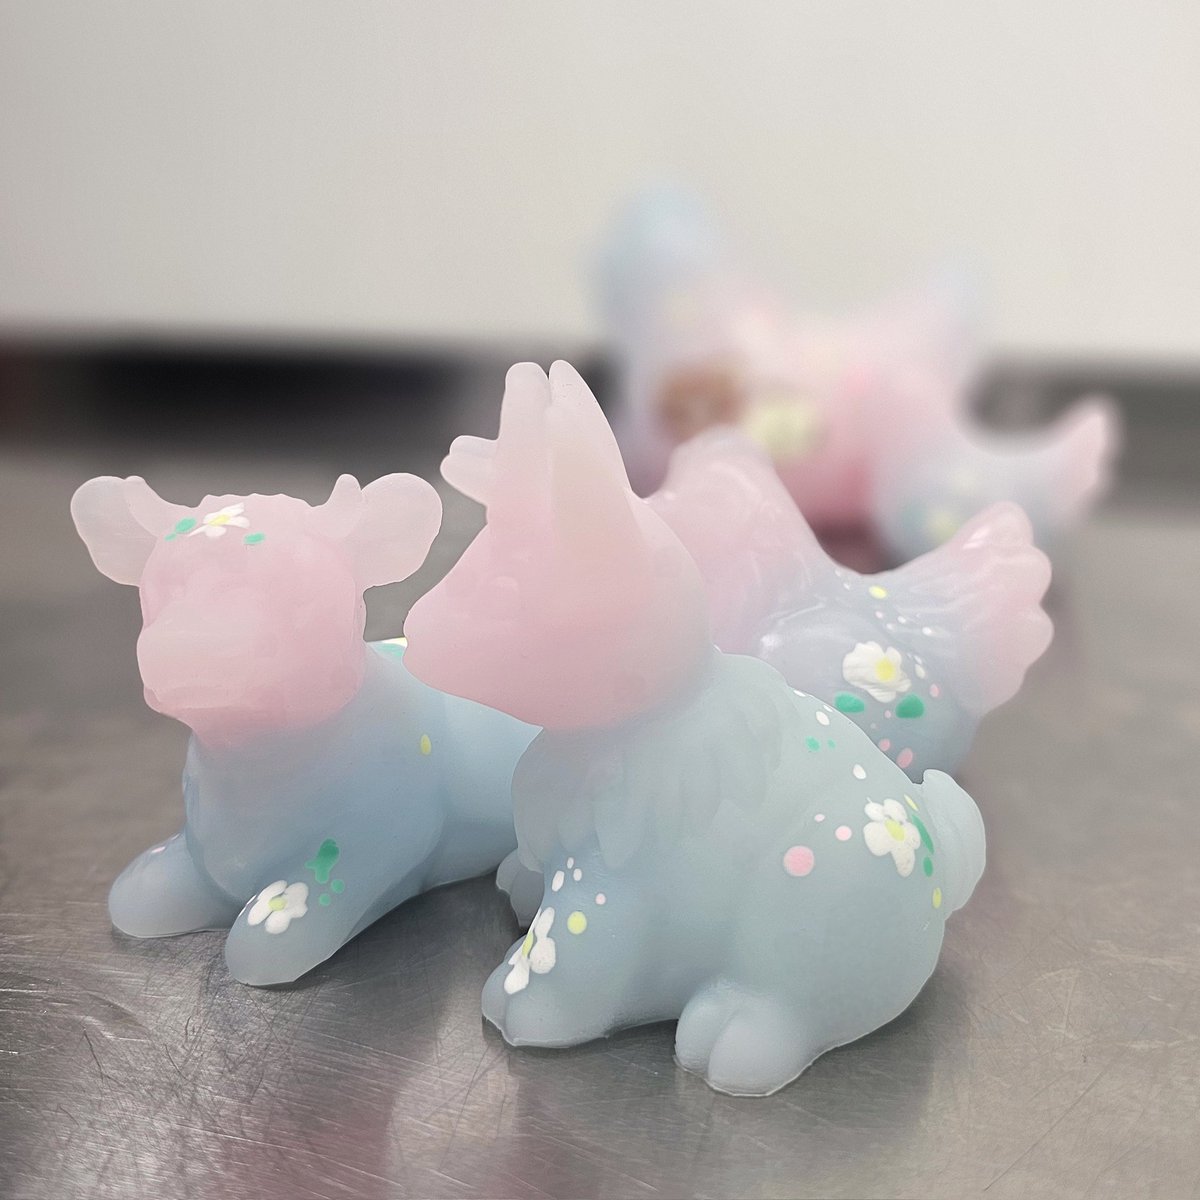 Some pastel, glowy Seedlings made with some extra silicone ✨🌸🩷